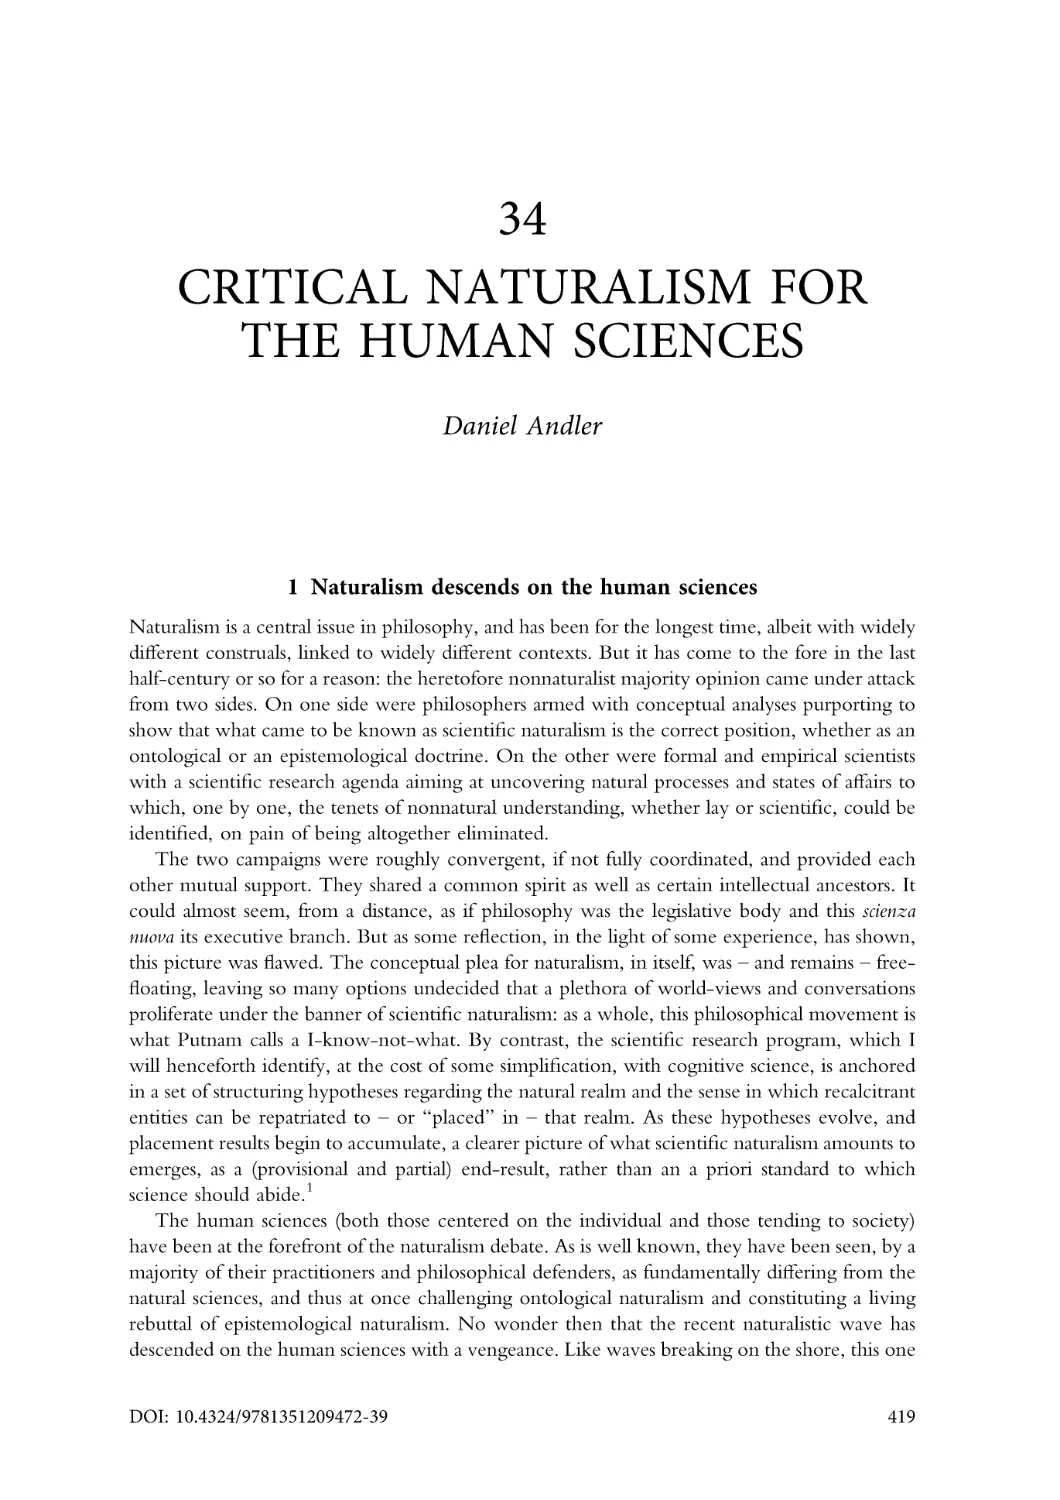 34. Critical naturalism for the human sciences
1. Naturalism descends on the human sciences